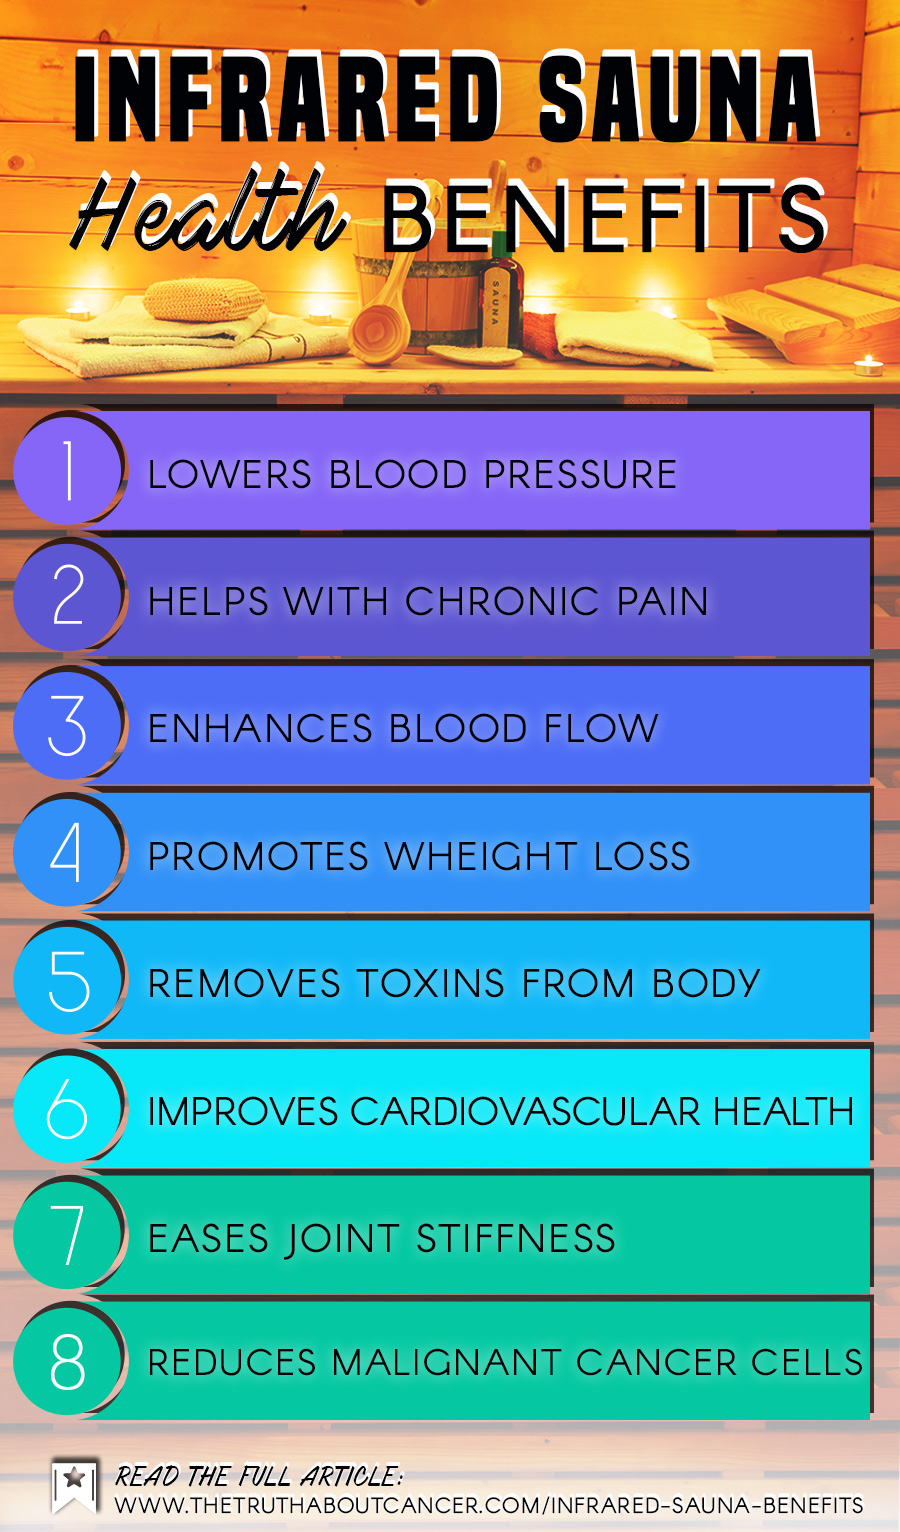 Infrared Sauna Benefits for Cancer & Other Healing: What You Need to Know